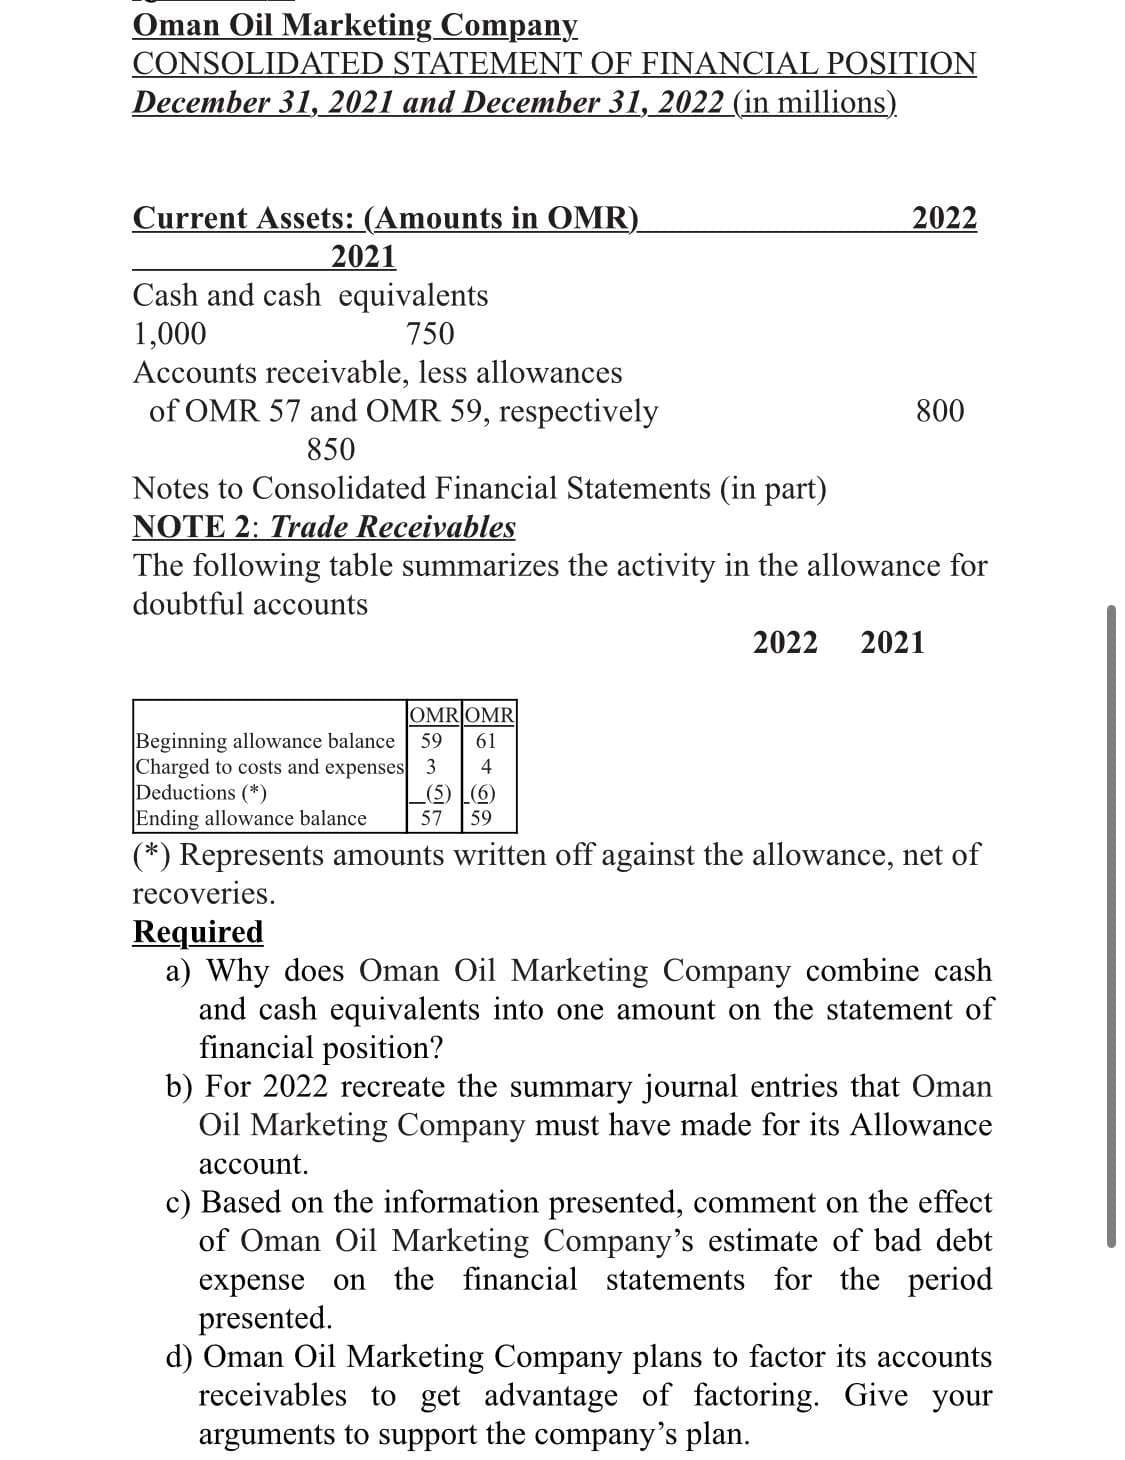 Oman Oil Marketing Company
CONSOLIDATED STATEMENT OF FINANCIAL POSITION
December 31, 2021 and December 31, 2022 (in millions)
Current Assets: (Amounts in OMR)_
2021
Cash and cash equivalents
1,000
750
Accounts receivable, less allowances
of OMR 57 and OMR 59, respectively
850
Notes to Consolidated Financial Statements (in part)
NOTE 2: Trade Receivables
The following table summarizes the activity in the allowance for
doubtful accounts
2022
2022
Beginning allowance balance 59
Charged to costs and expenses 3
800
2021
OMROMR
61
4
Deductions (*)
(5) (6)
Ending allowance balance 57 59
(*) Represents amounts written off against the allowance, net of
recoveries.
Required
a) Why does Oman Oil Marketing Company combine cash
and cash equivalents into one amount on the statement of
financial position?
b) For 2022 recreate the summary journal entries that Oman
Oil Marketing Company must have made for its Allowance
account.
c) Based on the information presented, comment on the effect
of Oman Oil Marketing Company's estimate of bad debt
expense on the financial statements for the period
presented.
d) Oman Oil Marketing Company plans to factor its accounts
receivables to get advantage of factoring. Give your
arguments to support the company's plan.